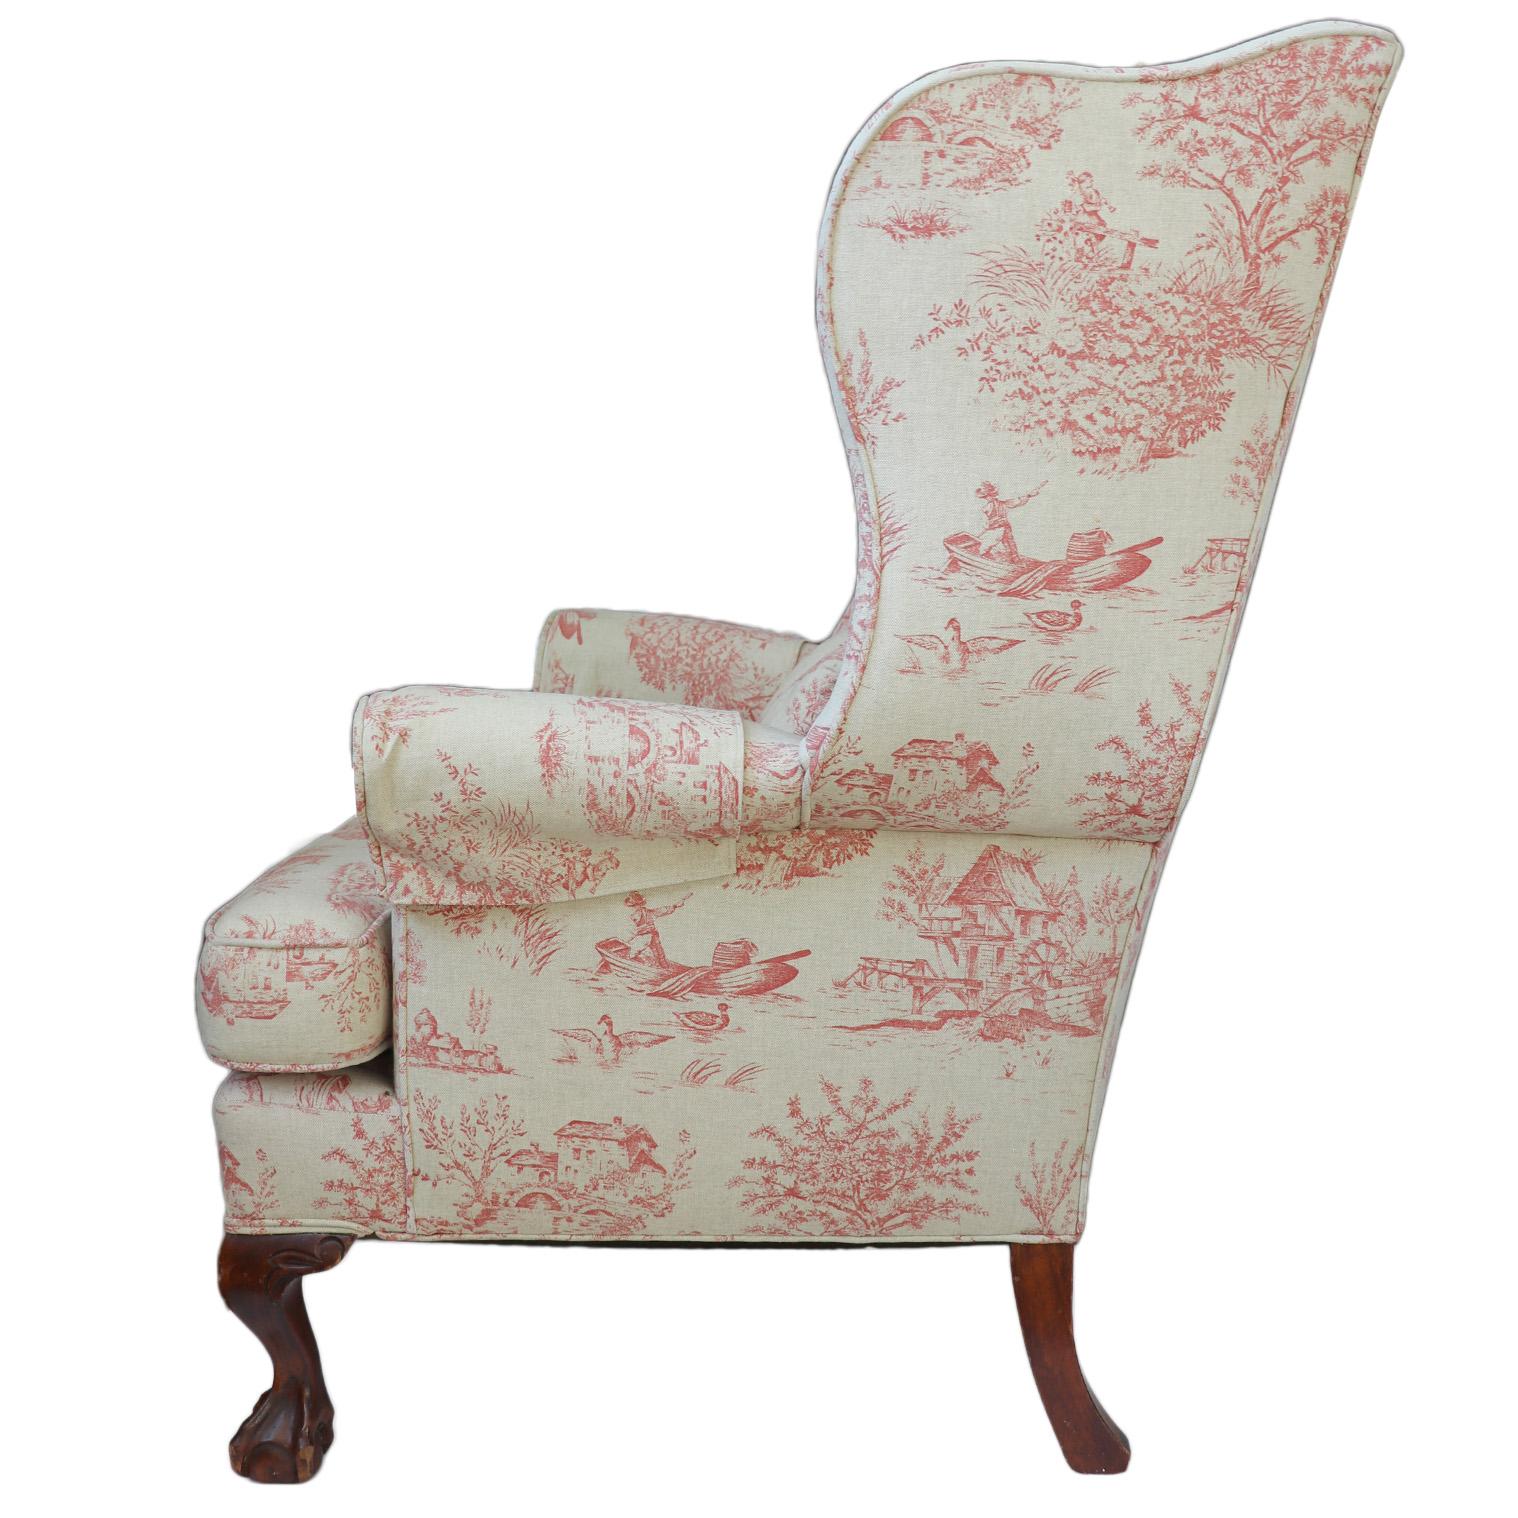 20th Century Vintage Decorative Fabric Chair For Sale